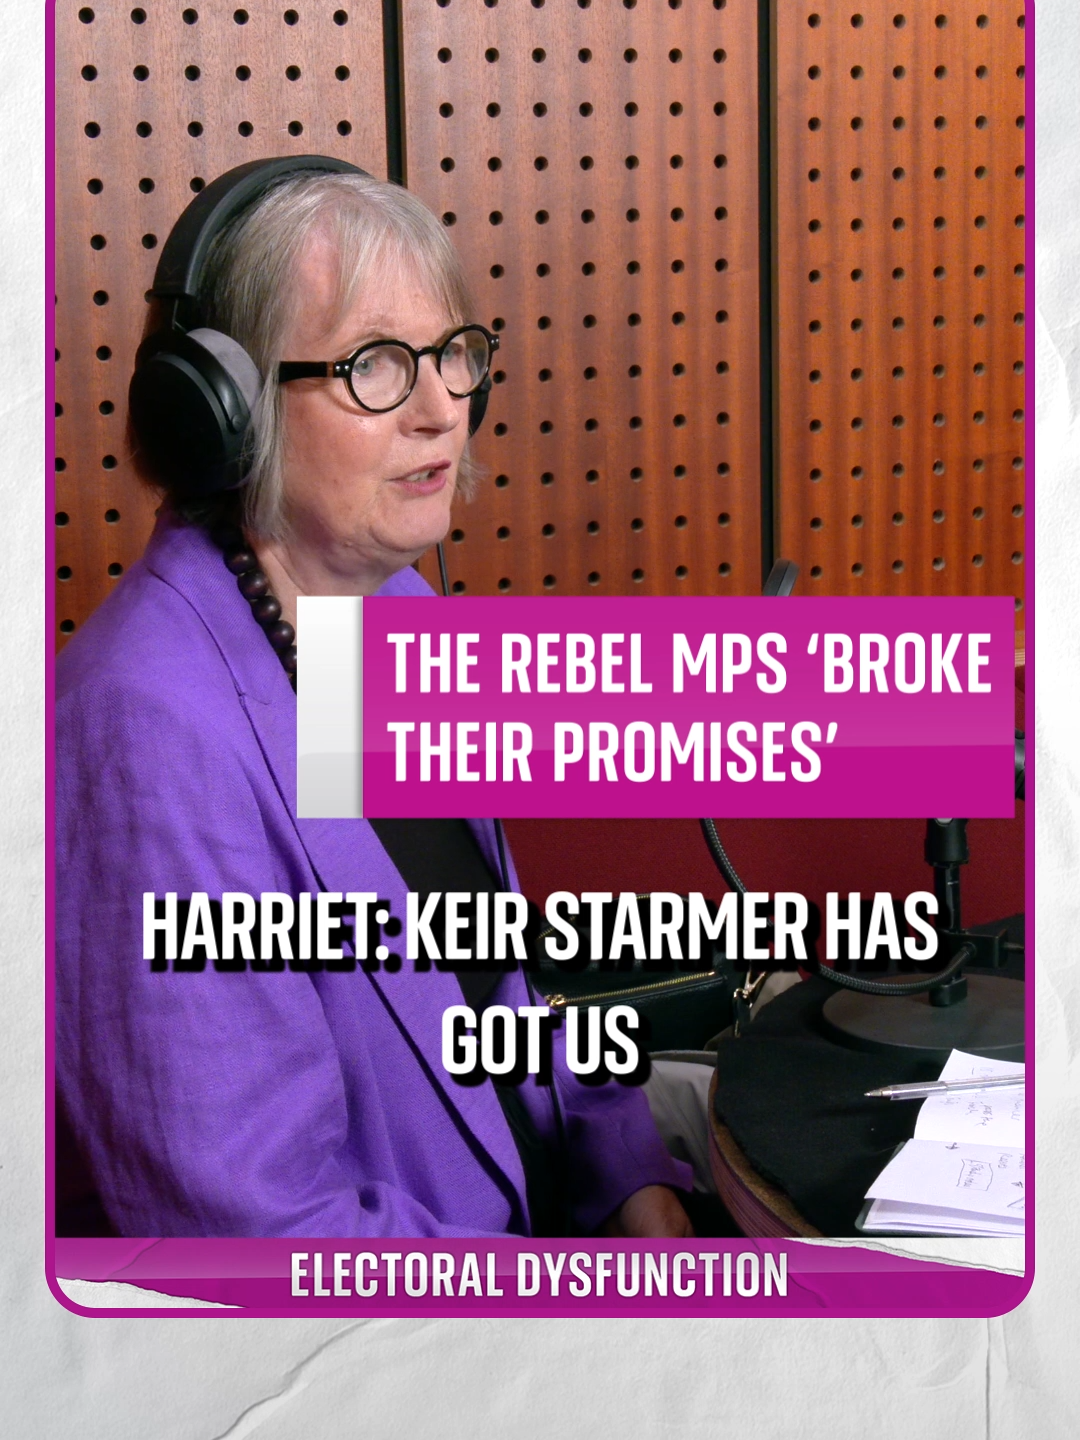 "They've broken their promises." 👀 #KeirStarmerhas suspended seven MPs from the #Labourparty. All of them voted for an amendment to the #KingsSpeech, put forward by the #SNP. The amendment would have scrapped the two-child benefit cap. Labour grandee #HarrietHarman shares her thoughts with #BethRigby and #SNP.  Hear more on the new episode of #ElectoralDysfunction out now - tap the link in the bio to listen.